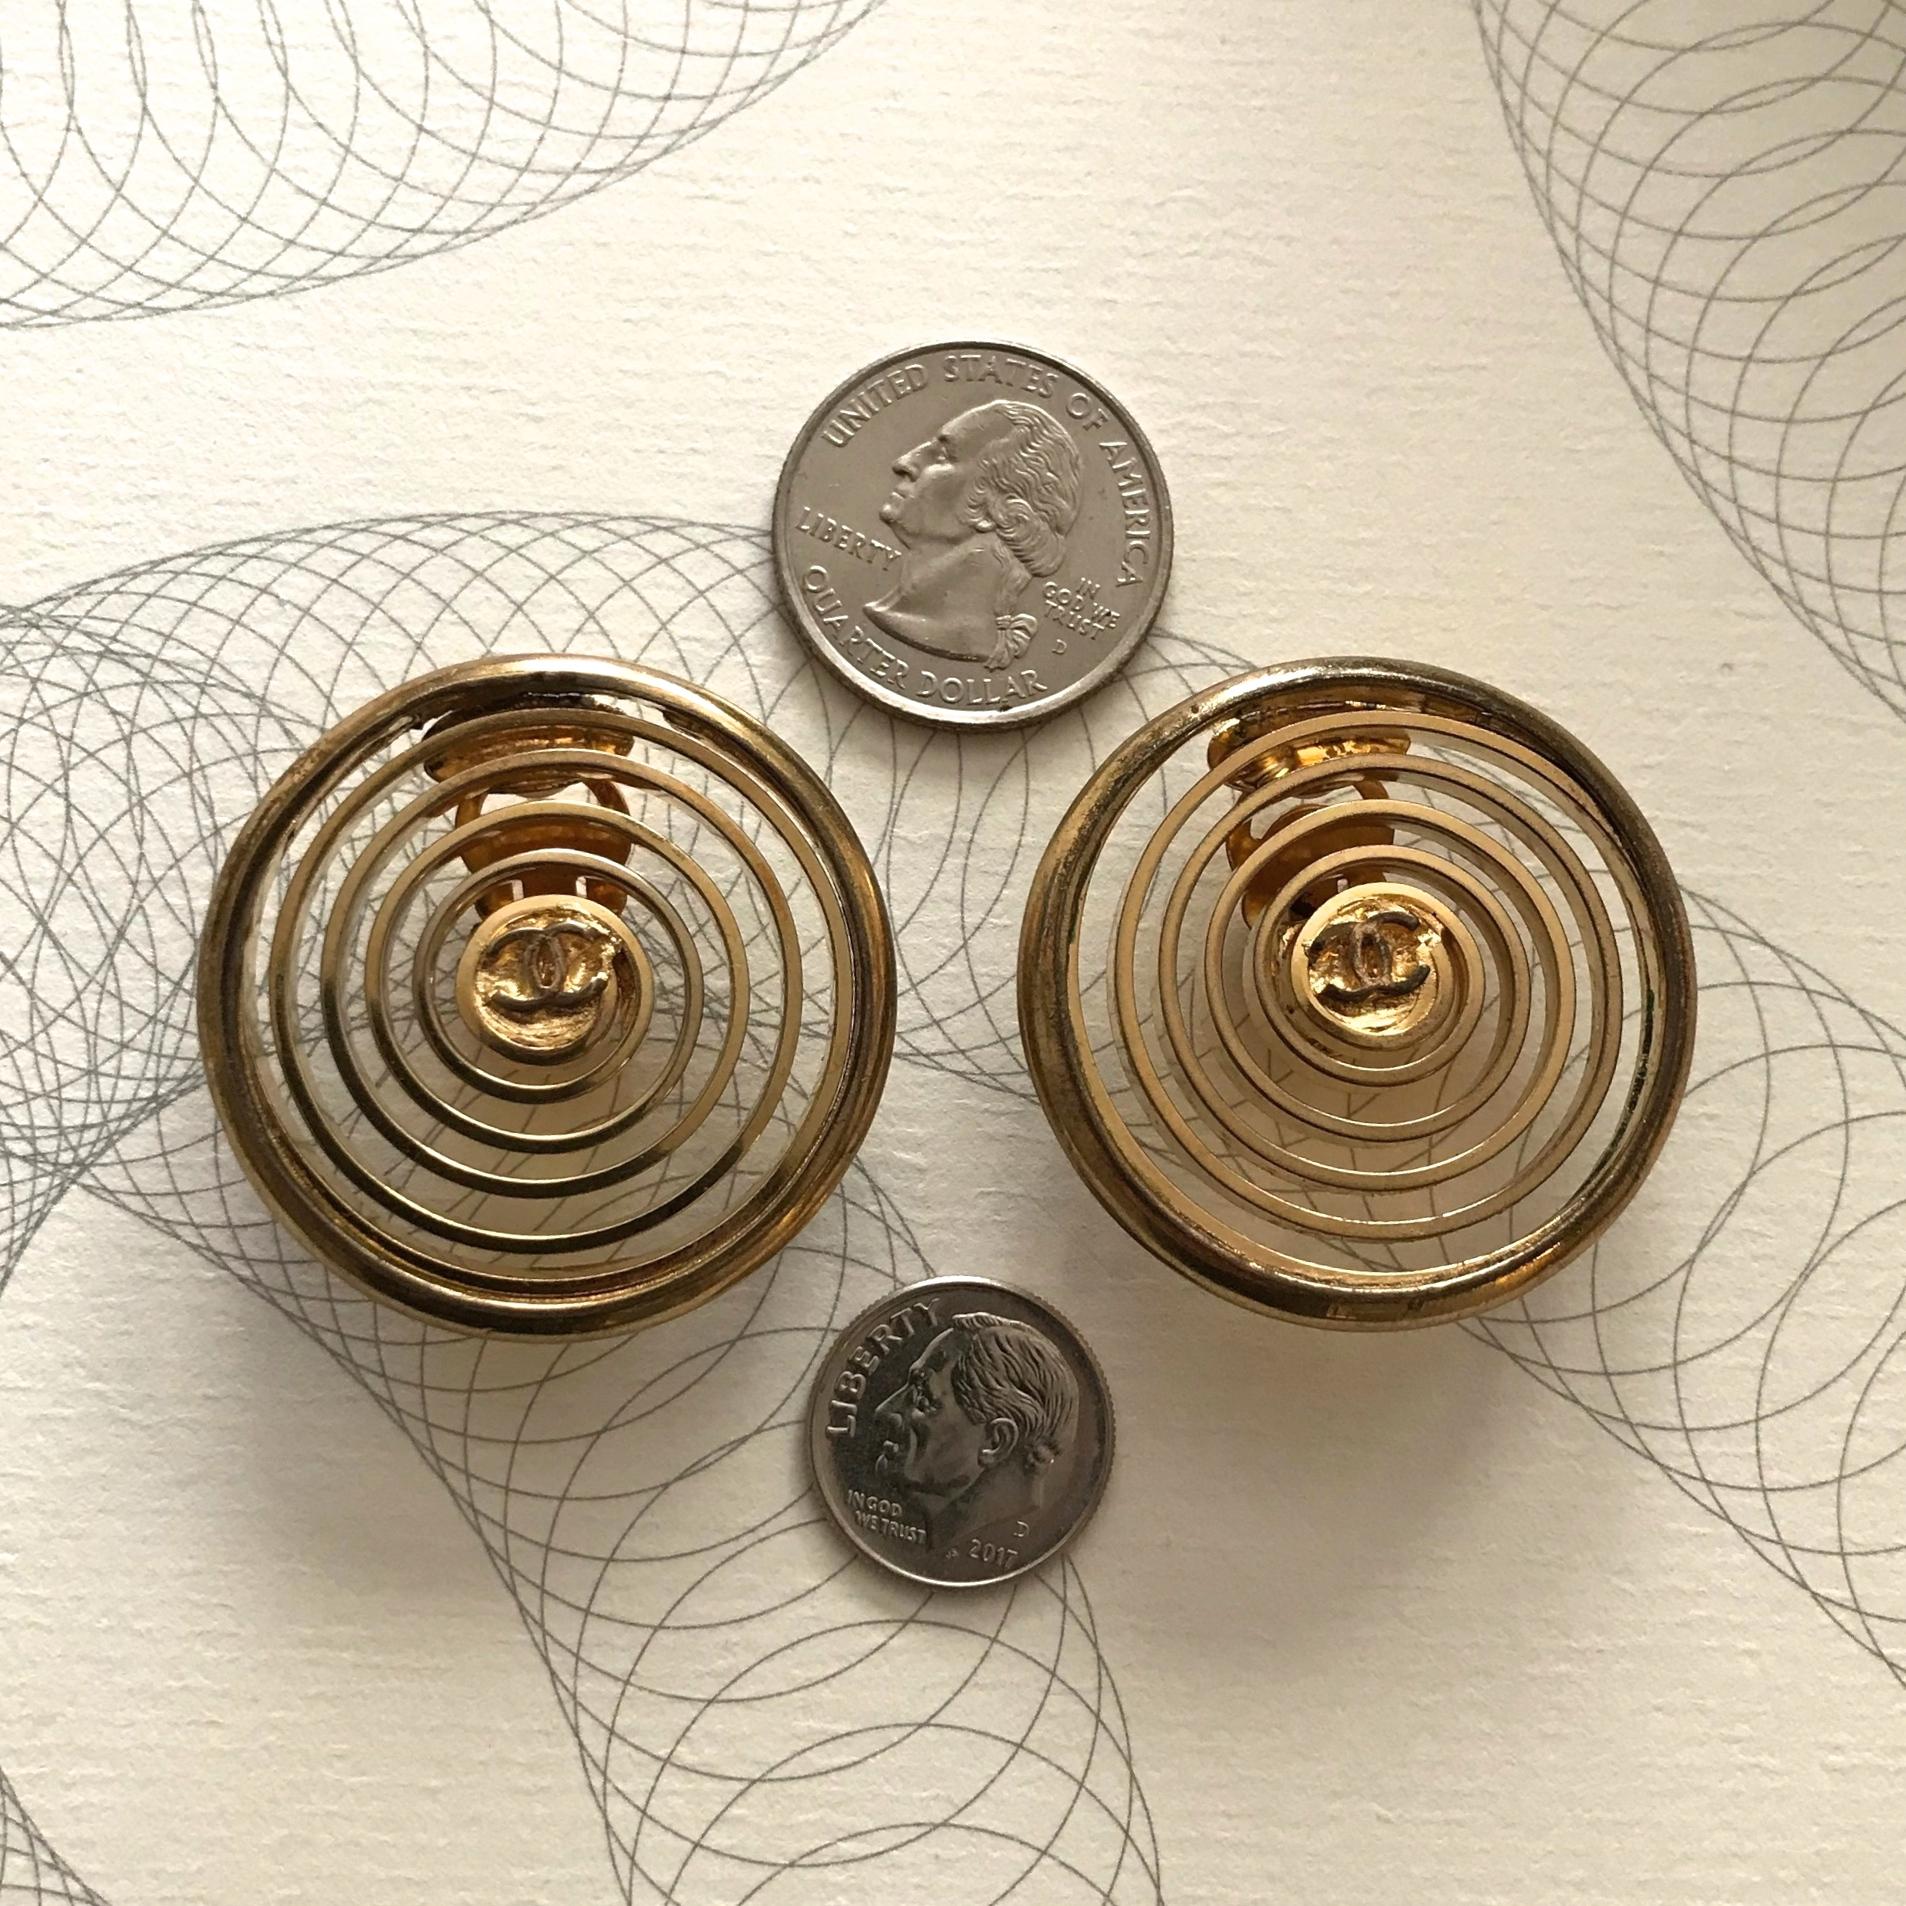 Get hypnotized by our adorable 1980s Chanel spiral earrings! Thin gold metal spirals with little CC's in the middle of each. Oversized silhouette. Clip on backs. Marked 